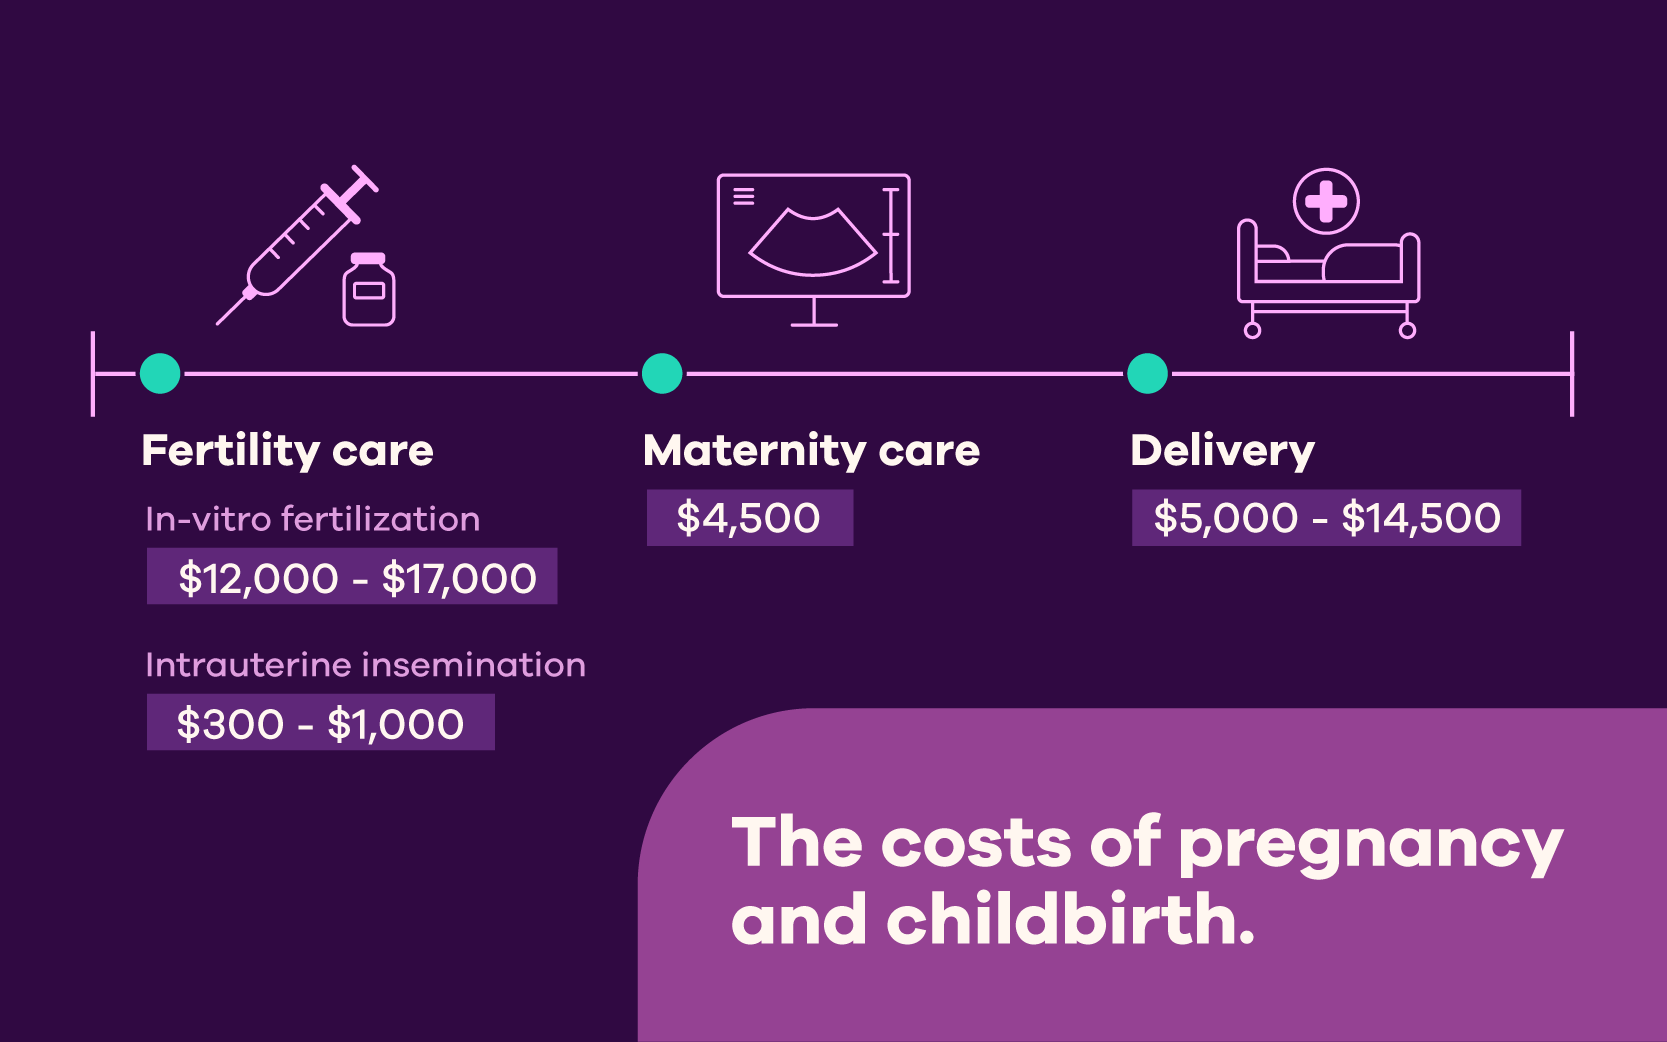 Timeline showing the costs of pregnancy and childbirth. Fertility care: Invitro fertilization ($12,000 to $17,000), Intrauterine insemination ($300 to $1,000), Maternity care ($4,500), Delivery ($5,000 to $14,500)